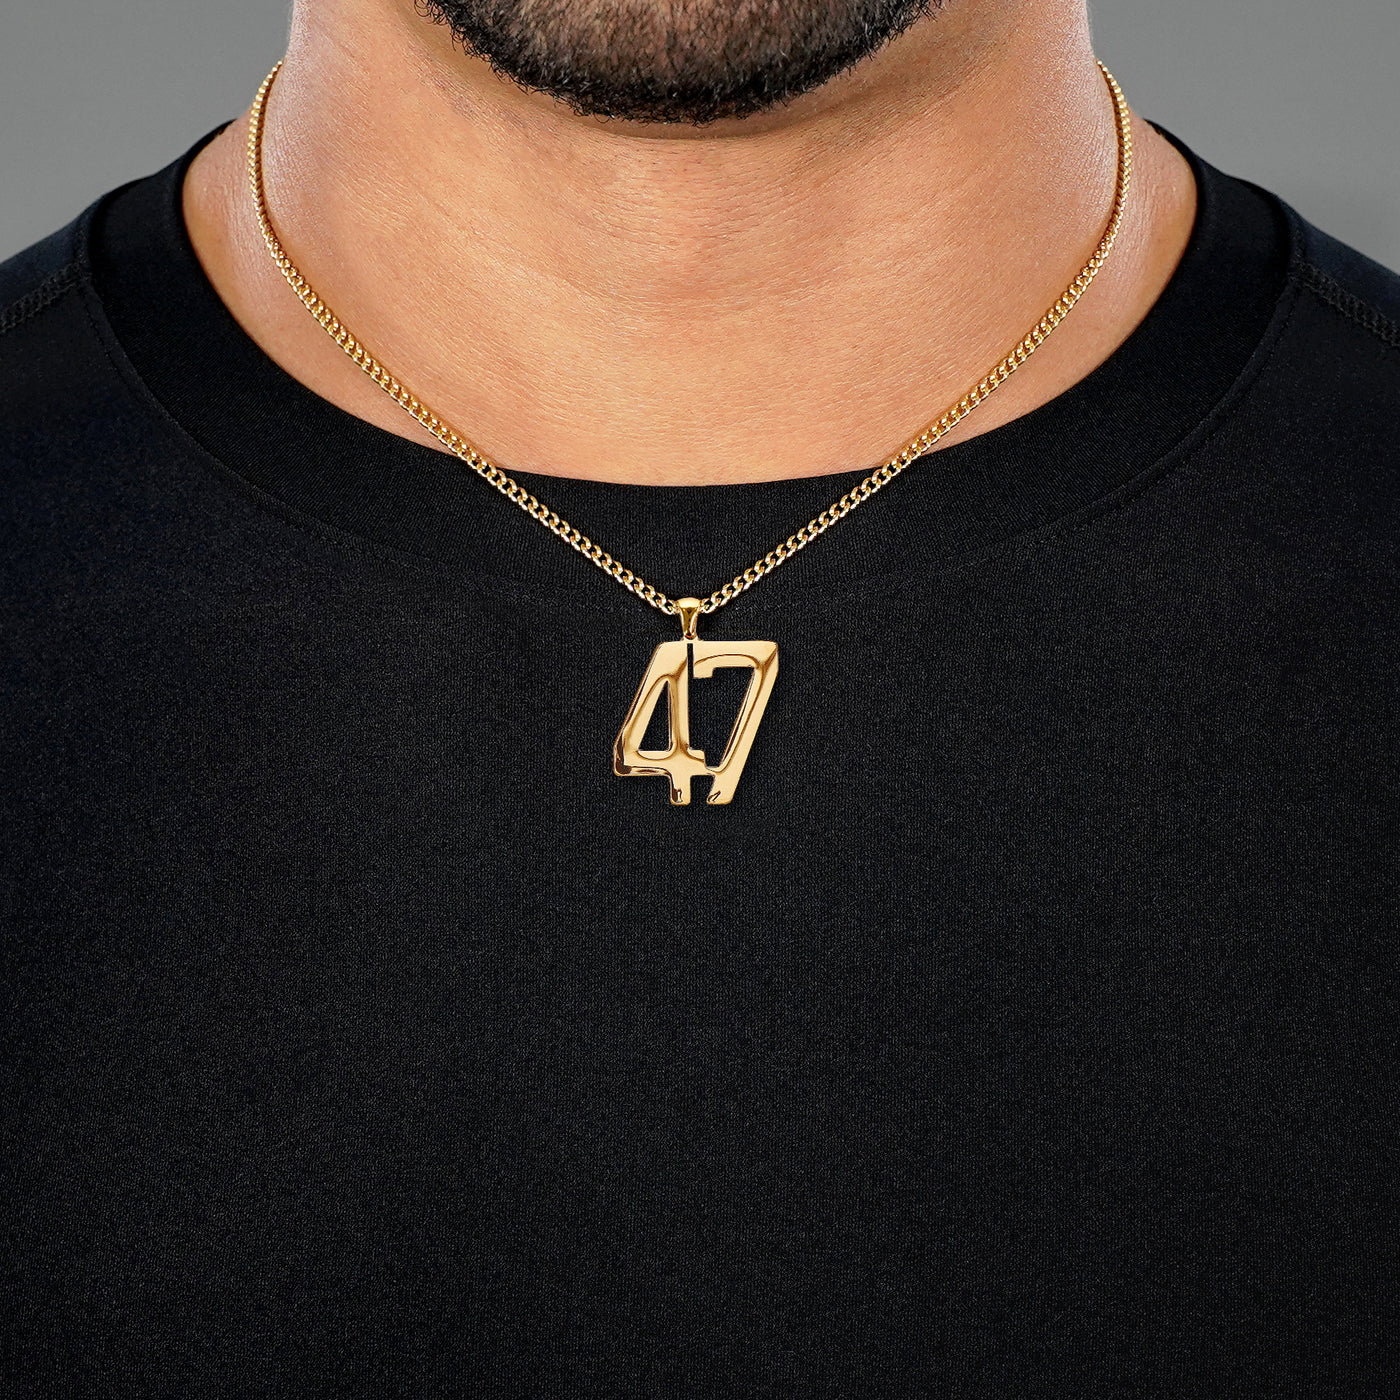 47 Number Pendant with Chain Necklace - Gold Plated Stainless Steel